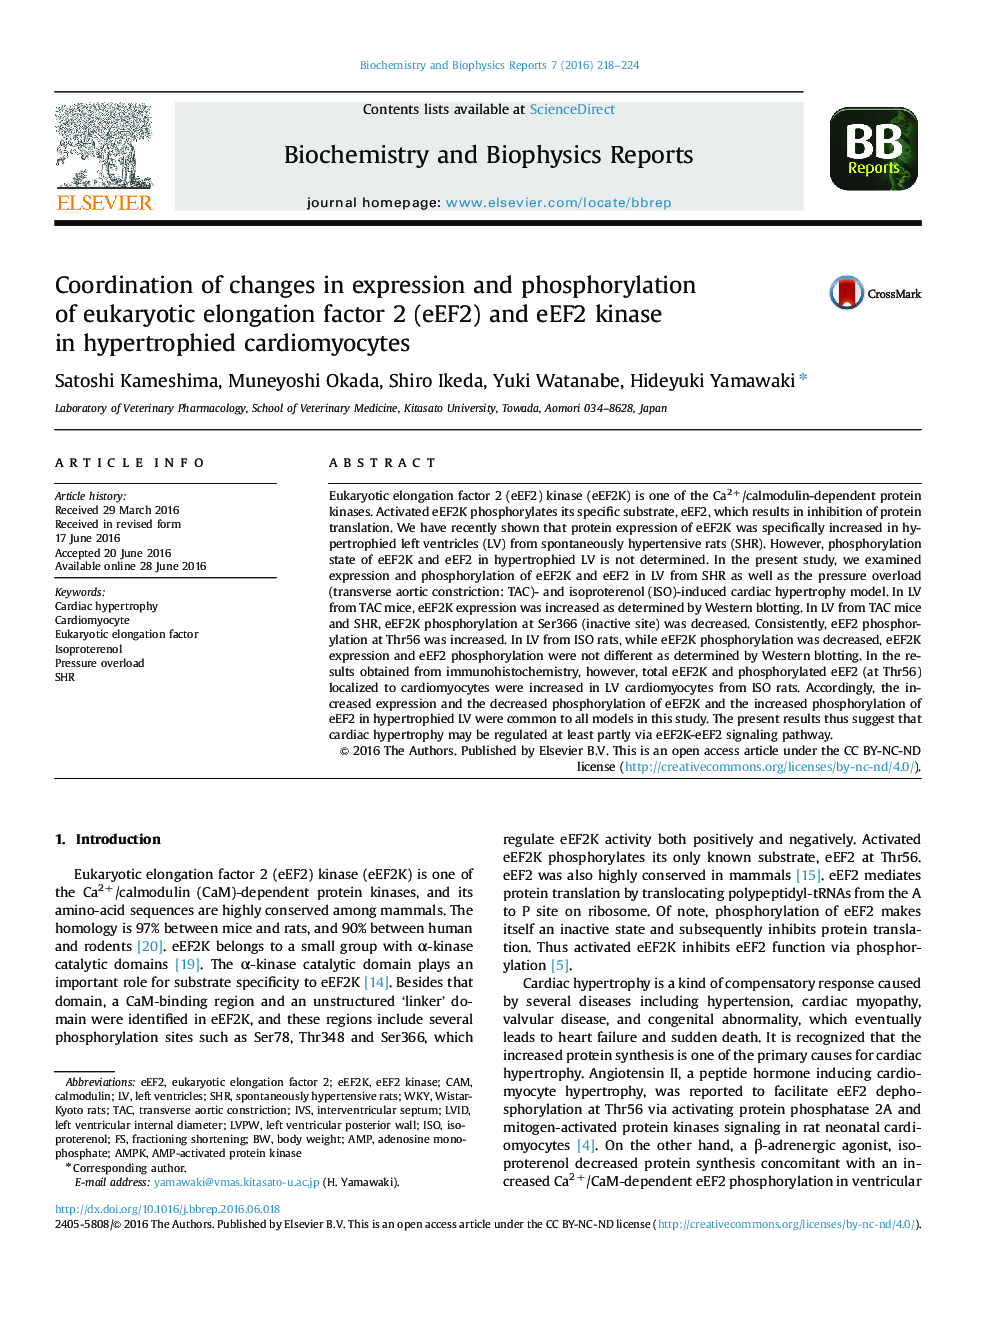 Coordination of changes in expression and phosphorylation of eukaryotic elongation factor 2 (eEF2) and eEF2 kinase in hypertrophied cardiomyocytes